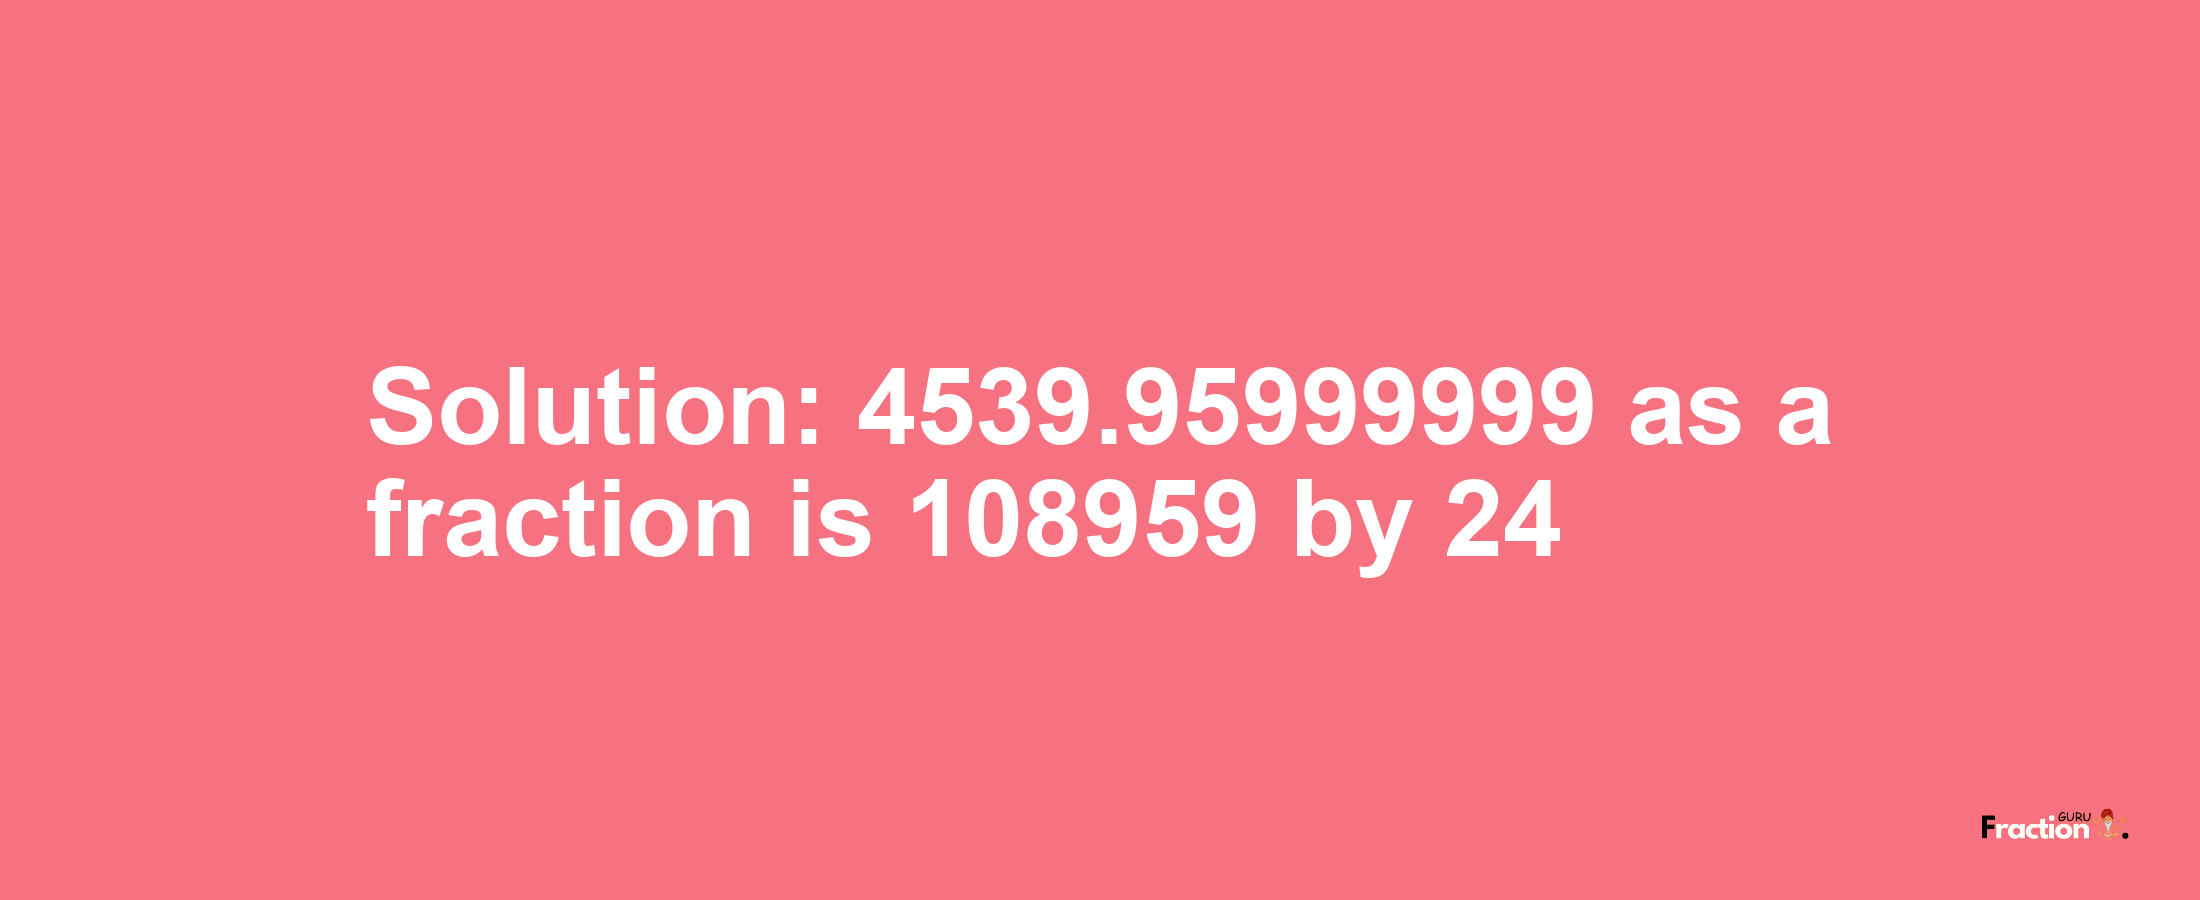 Solution:4539.95999999 as a fraction is 108959/24